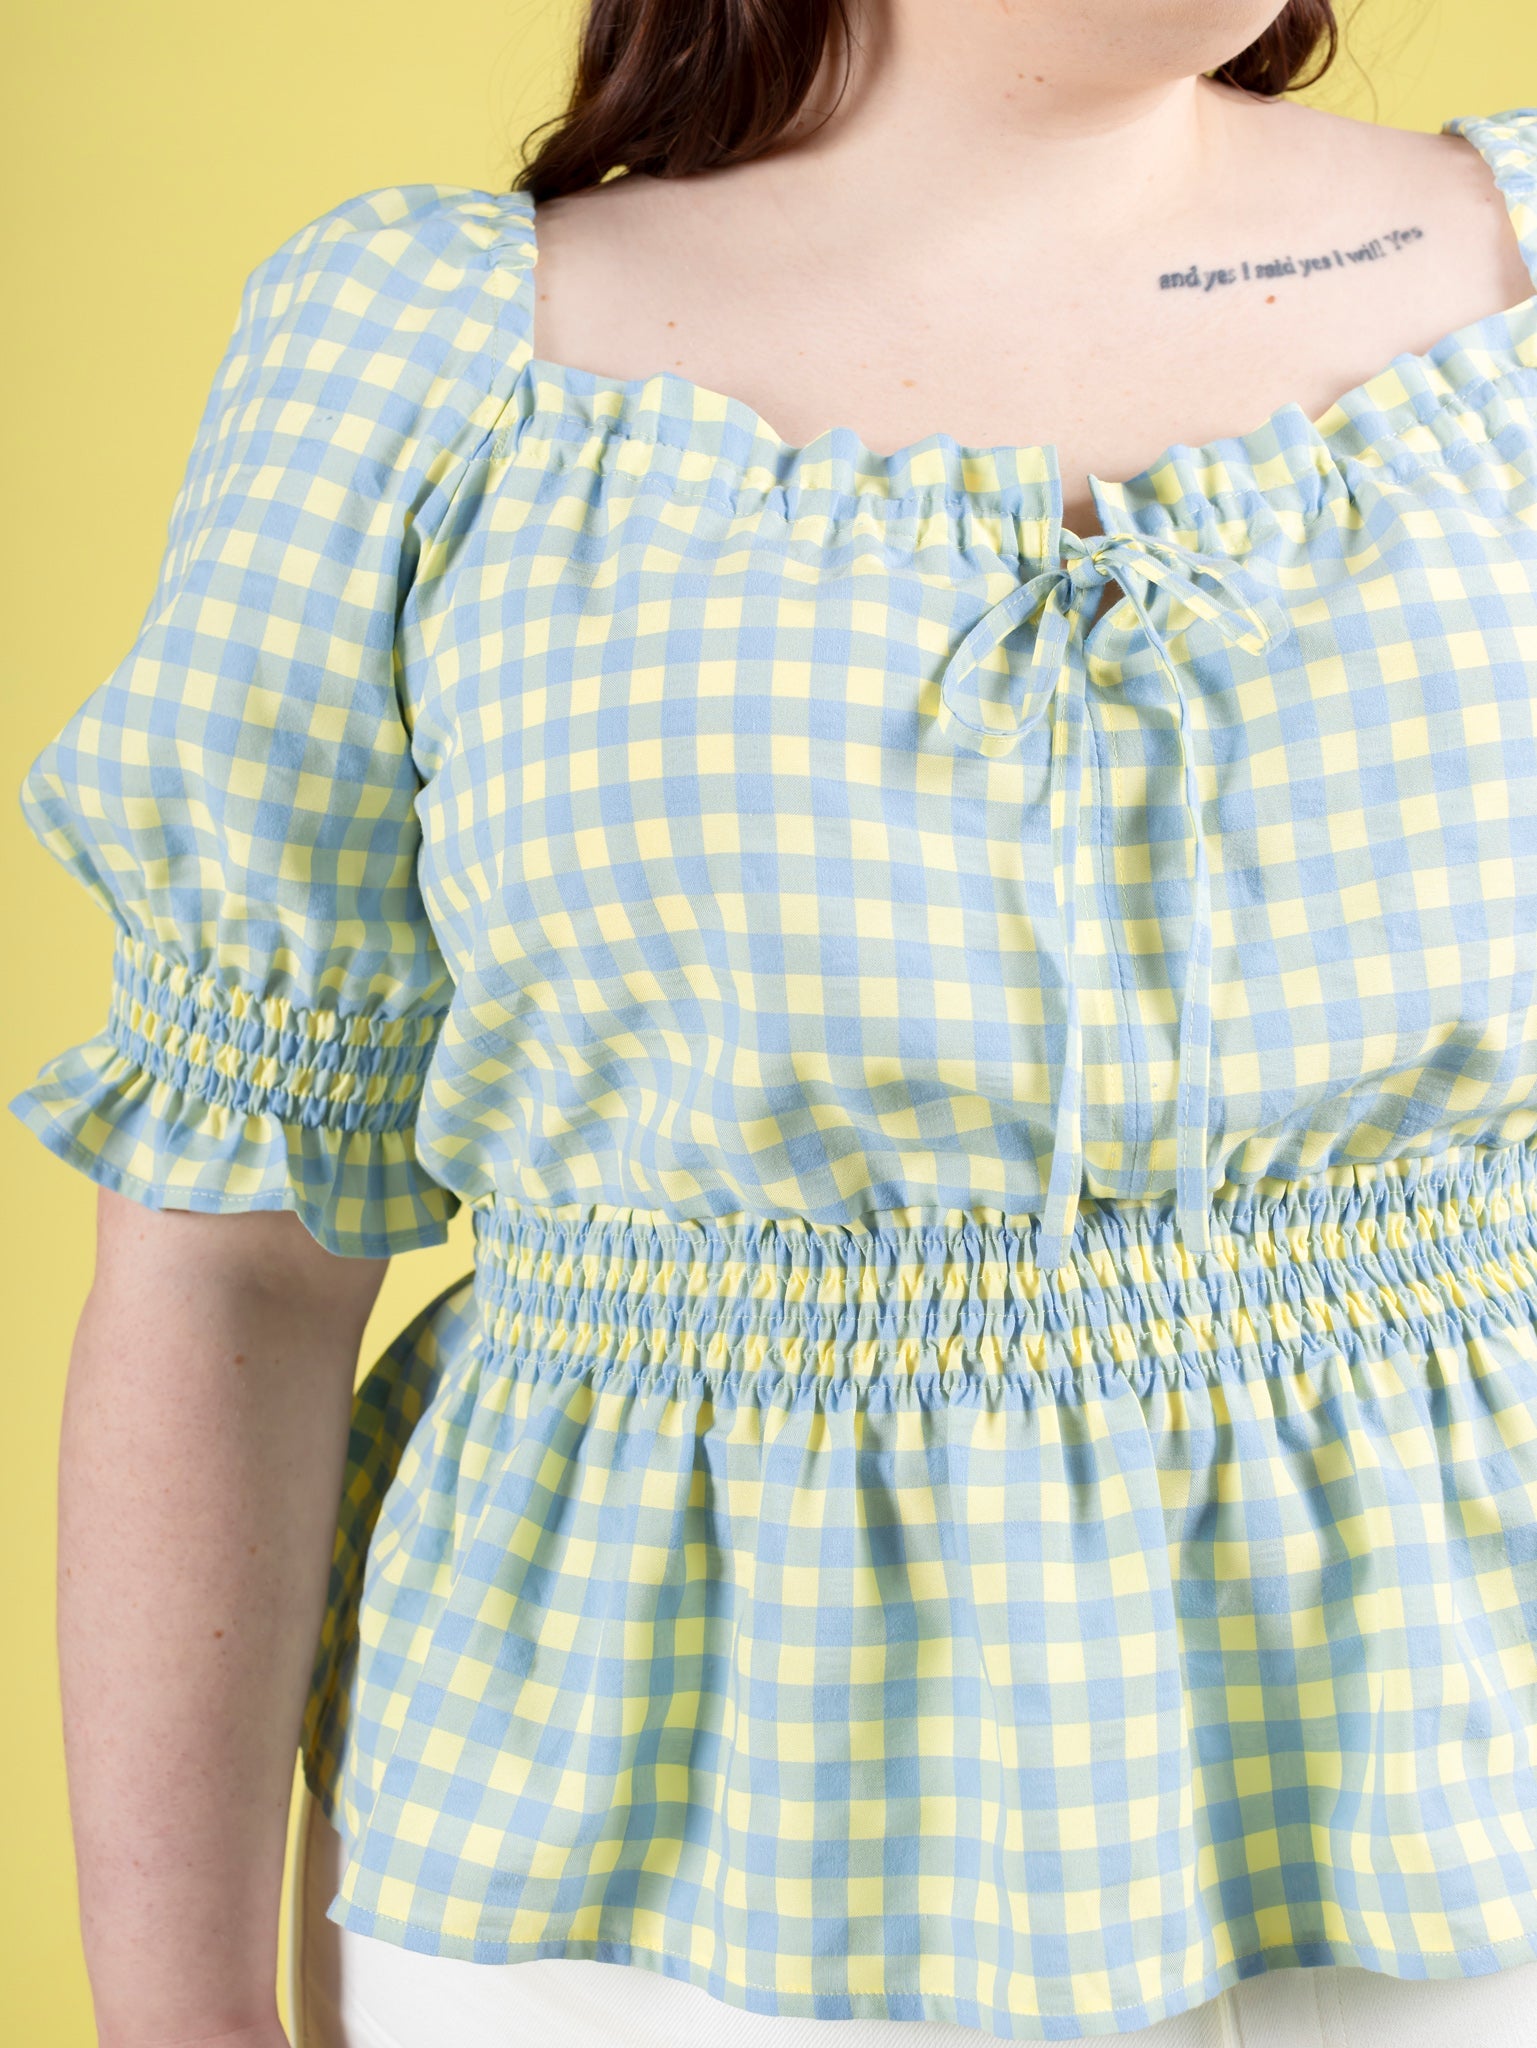 Tilly and The Buttons Mable Dress and Blouse Pattern from Jaycotts Sewing Supplies